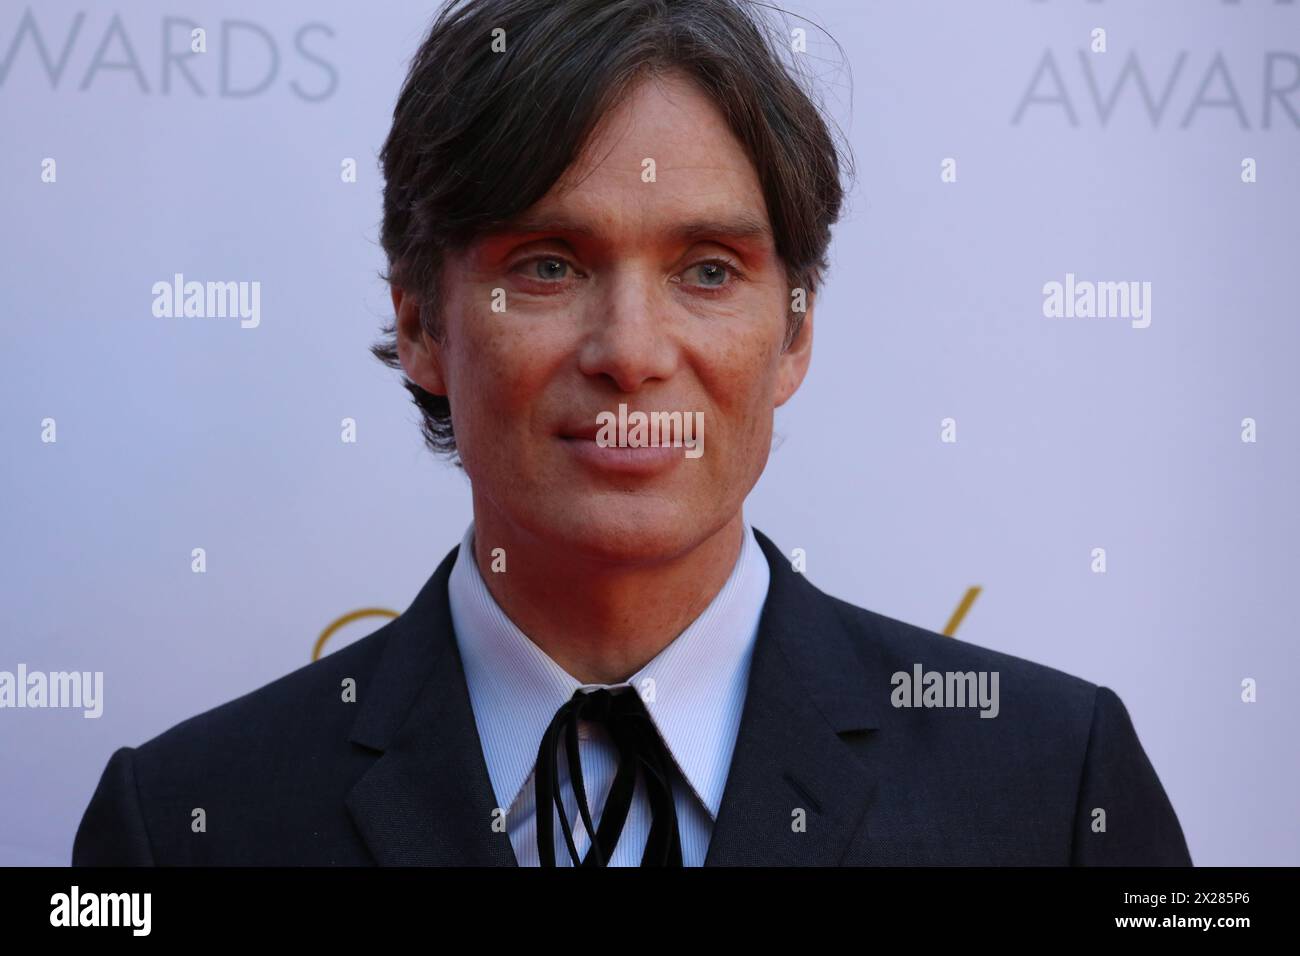 Dublin, Ireland. 20th April 2024.  Cillian Murphy, winner of the award Lead Actor - Film, for the film Oppenheimer, arriving on the red carpet at the Irish Film and Television Awards (IFTA), Dublin Royal Convention Centre. Credit: Doreen Kennedy/Alamy Live News. Stock Photo